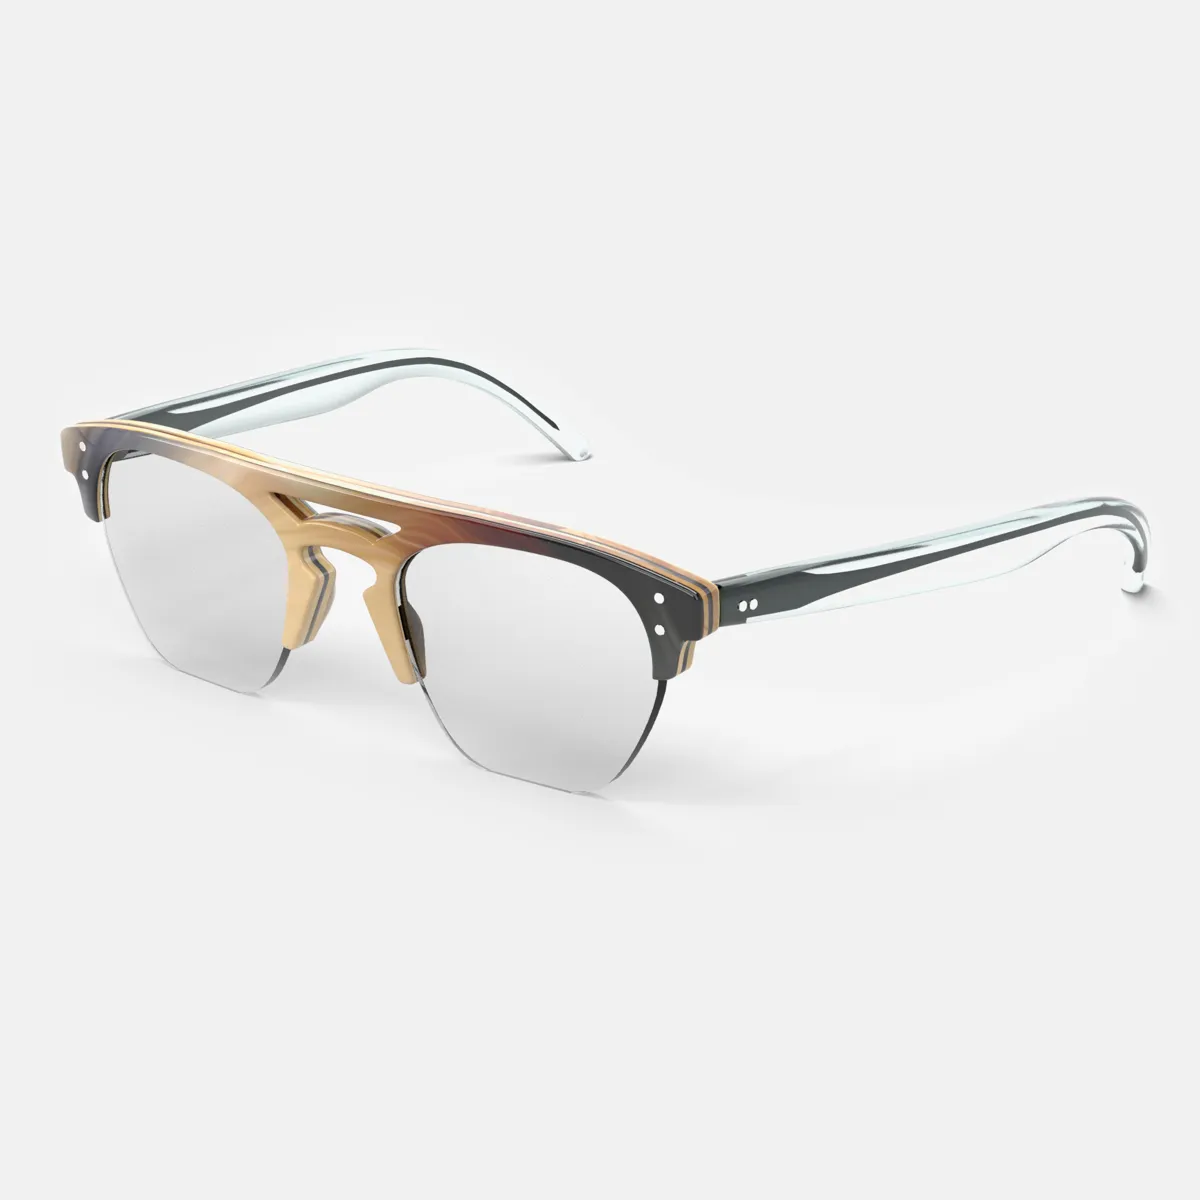 Werne Oval Sunglasses